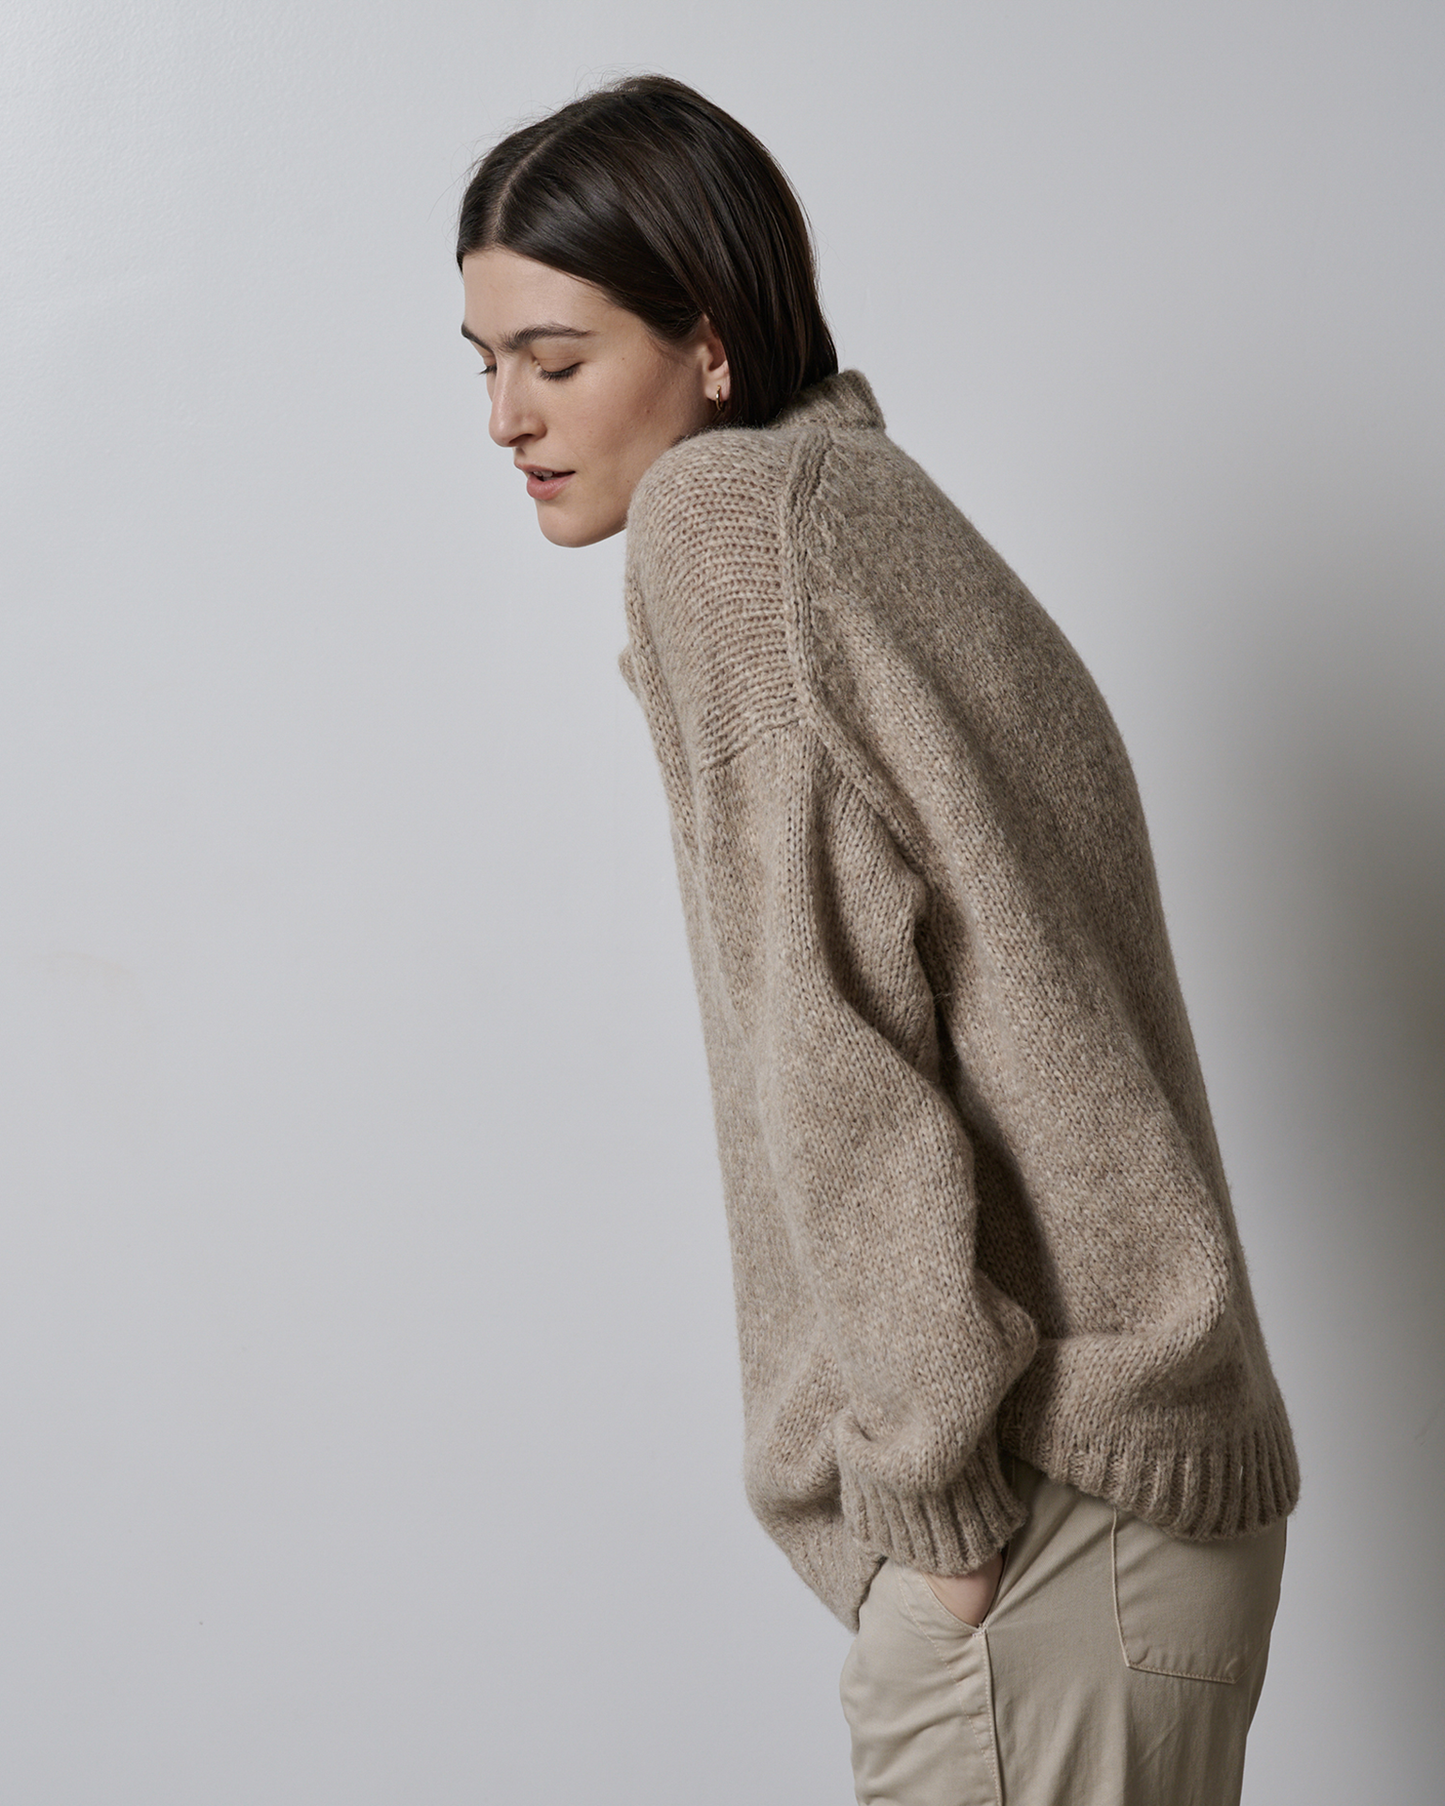 CAMBRIA SWEATER IN OATMEAL